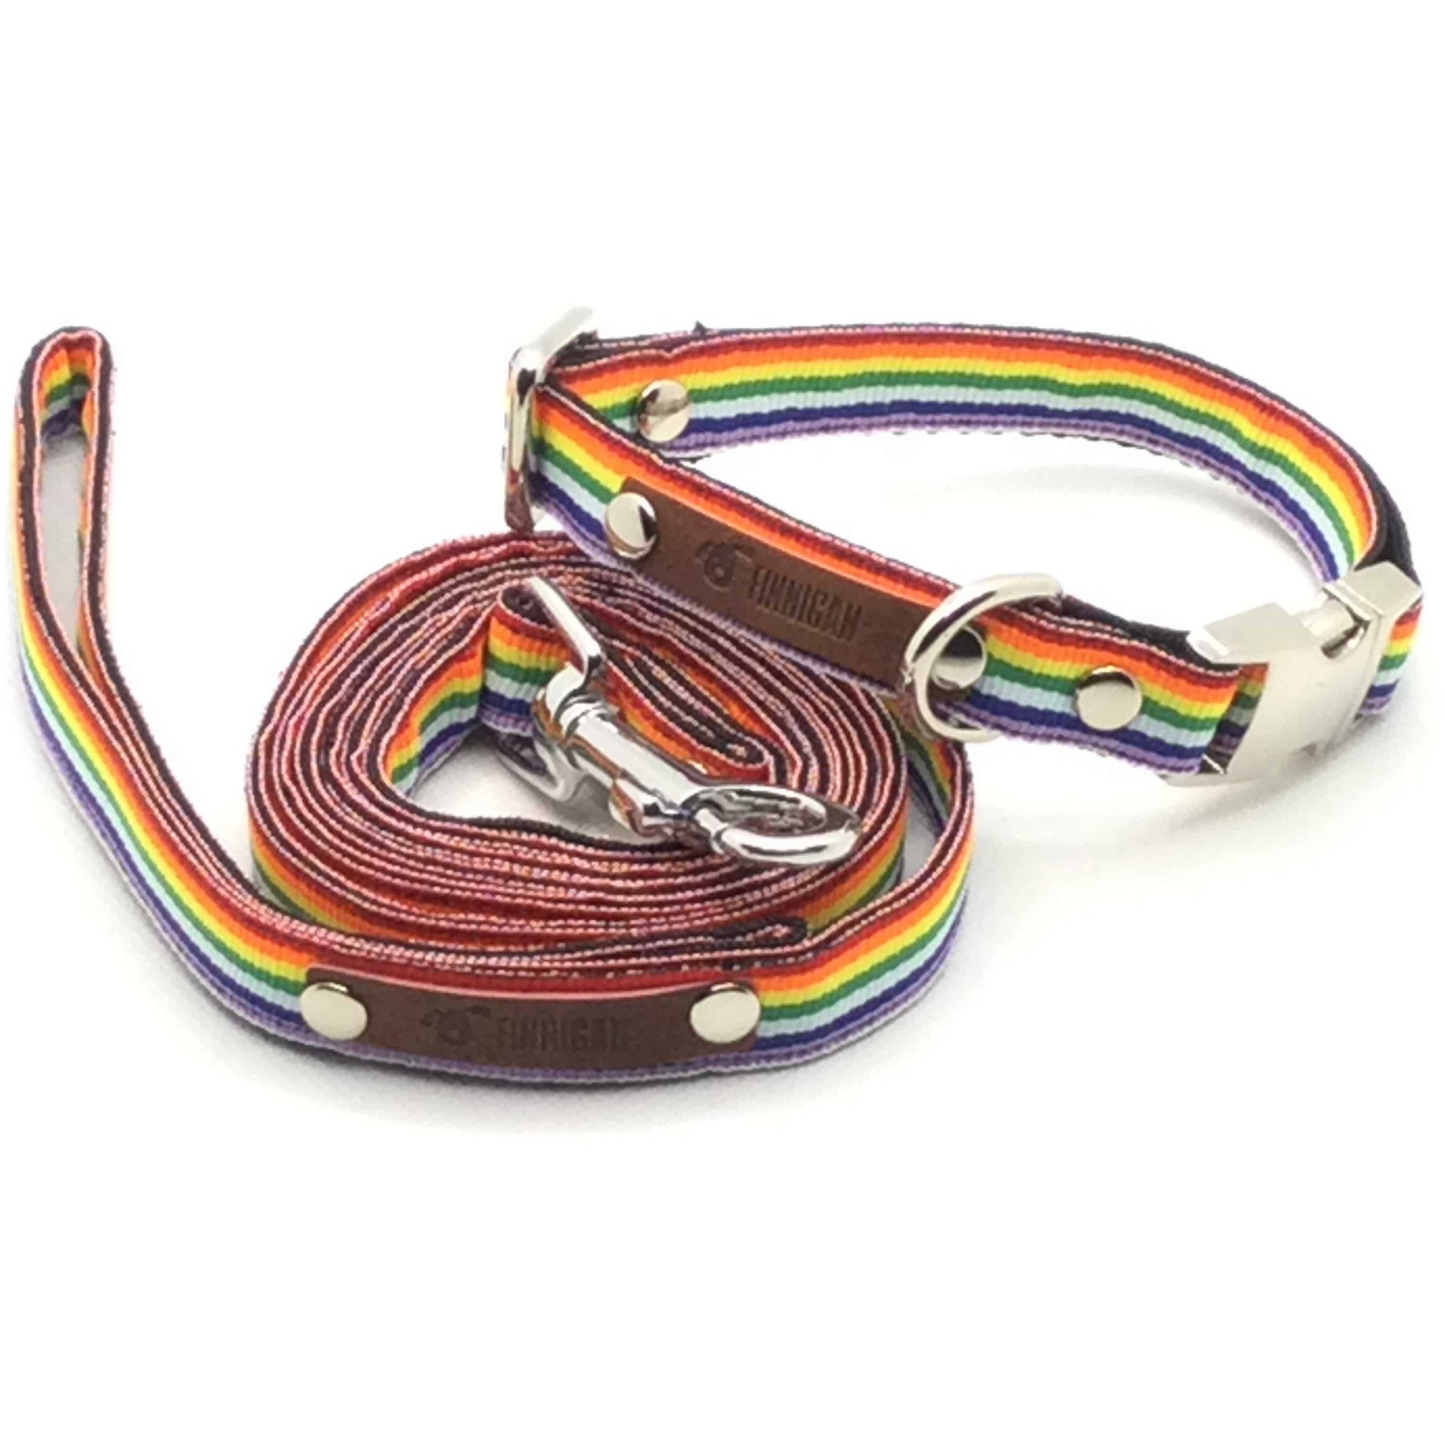 Wholesale Love Is Love! Large - Durable Handmade Dog Collar for Large Breed Dogs